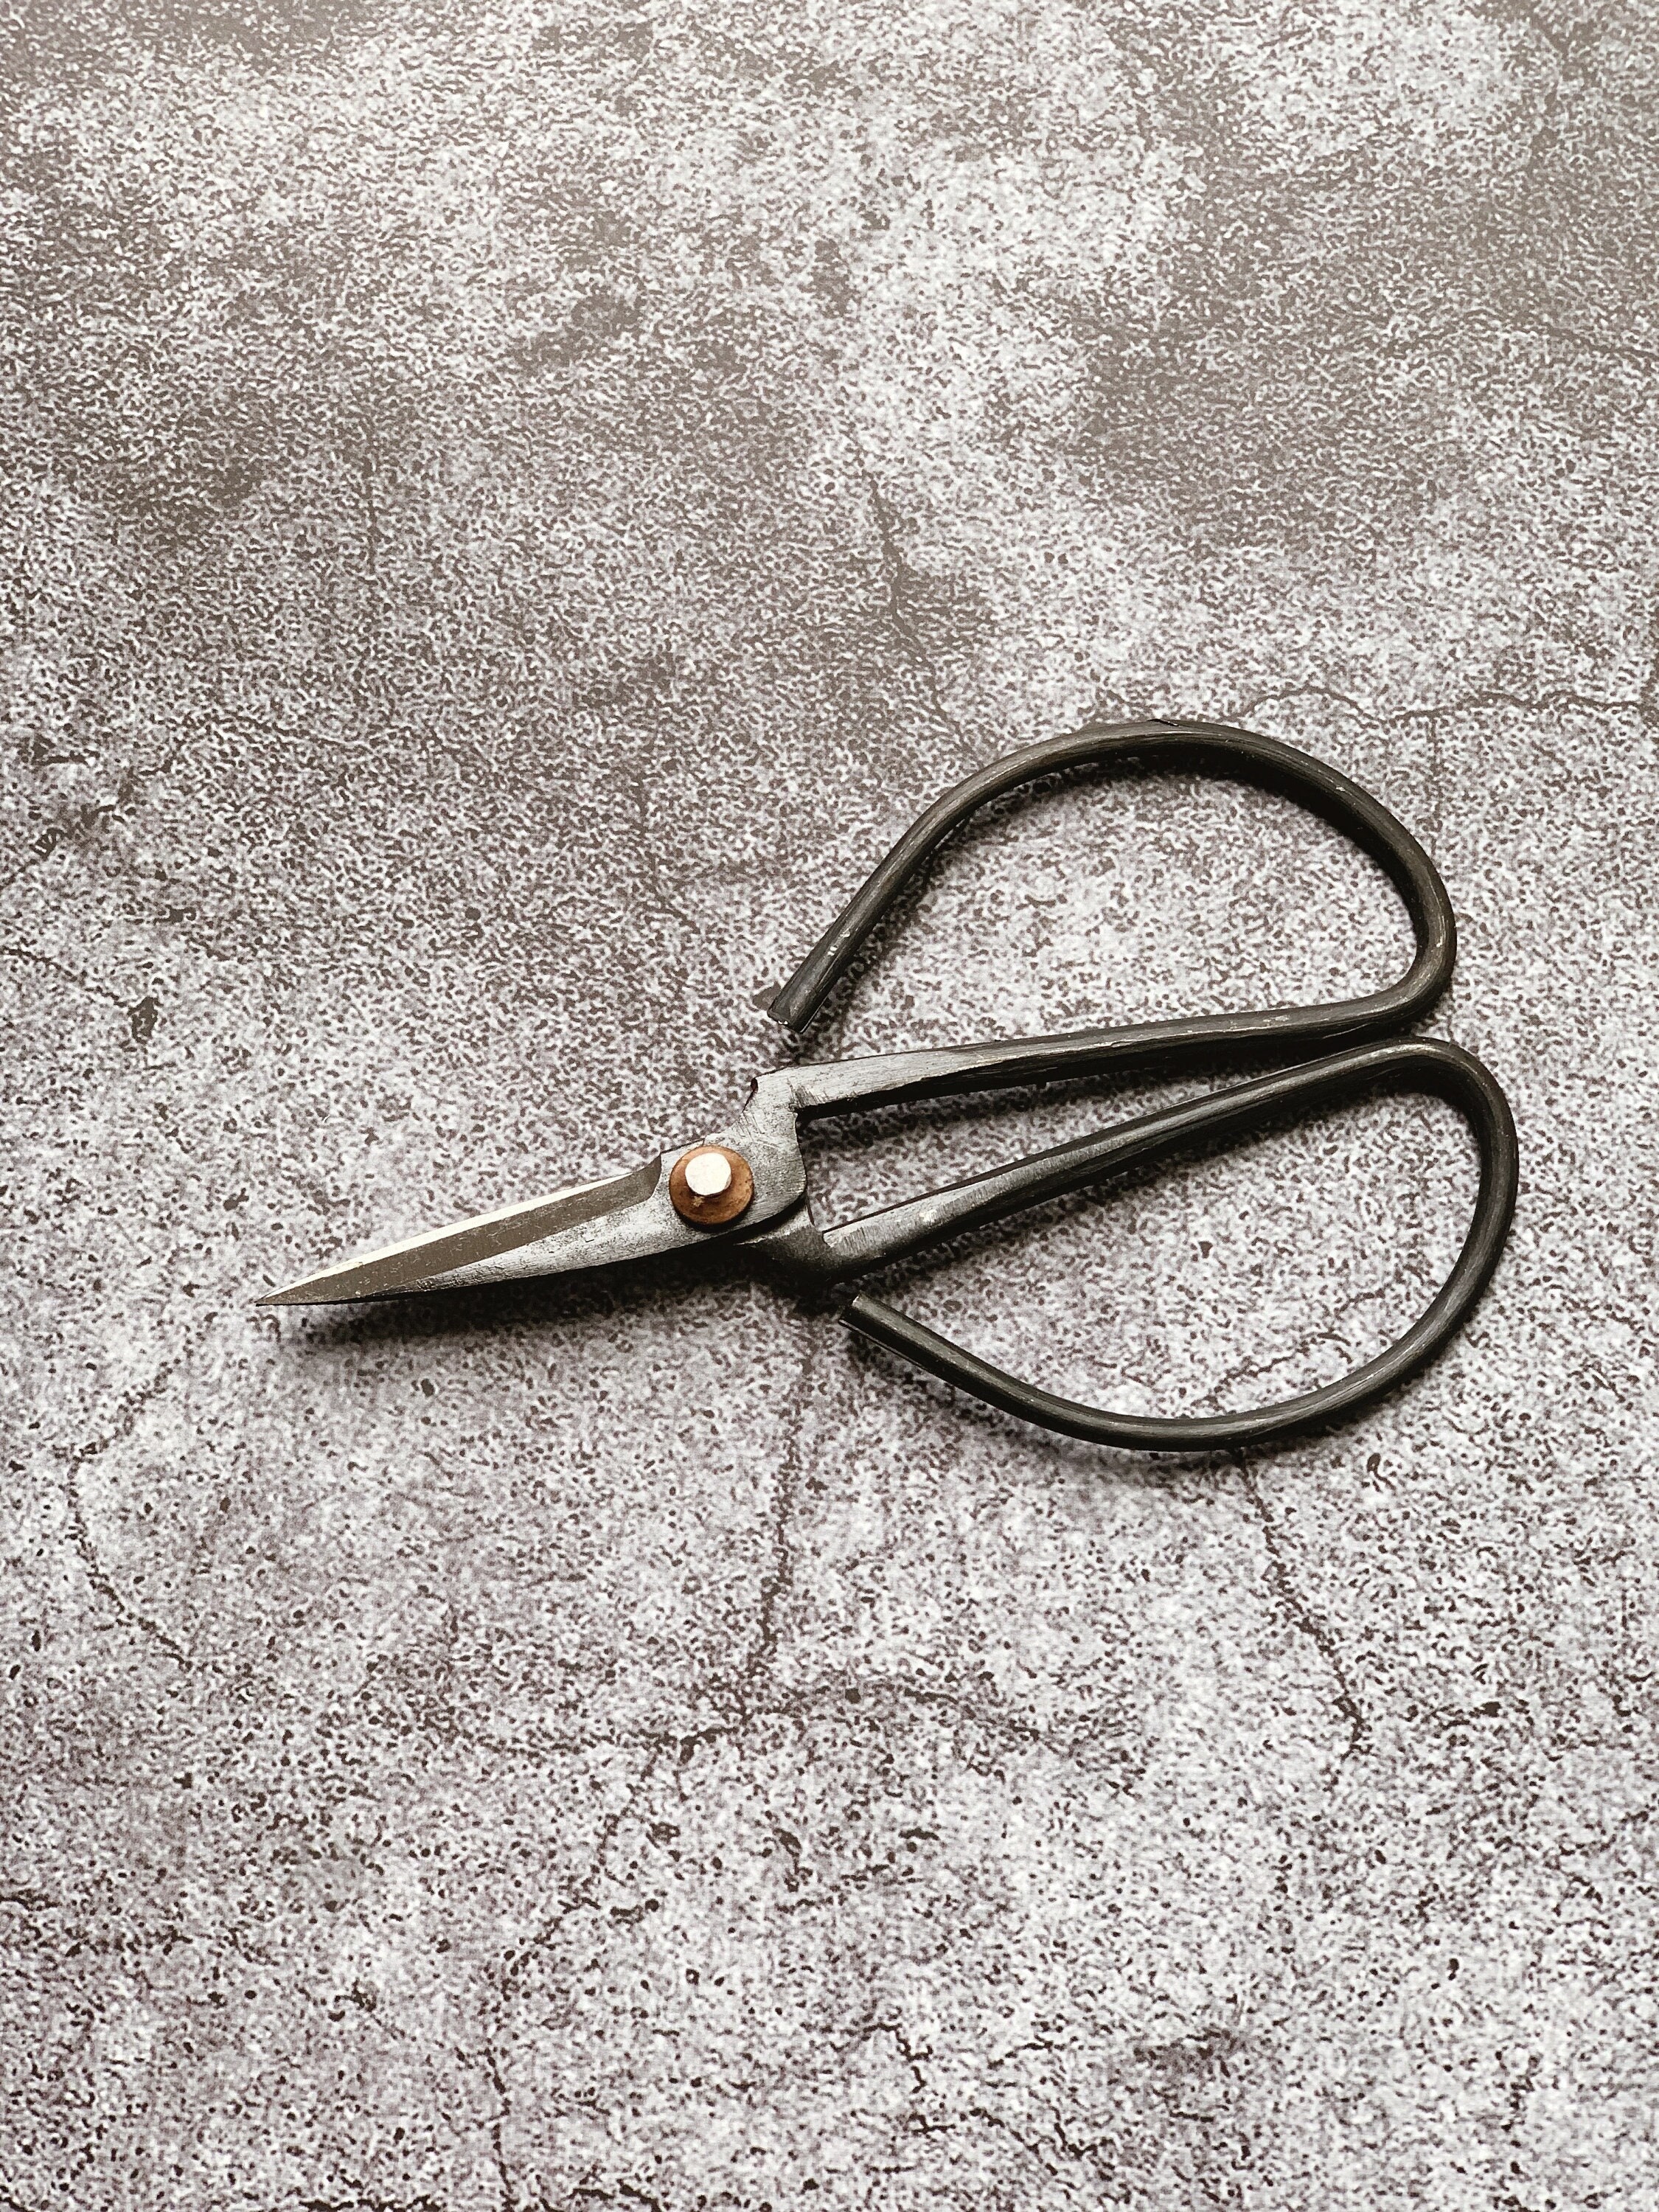 Small Stainless Knitting Scissors Steel Craft Scissors // Small Yarn  Notions or Sewing Scissors 